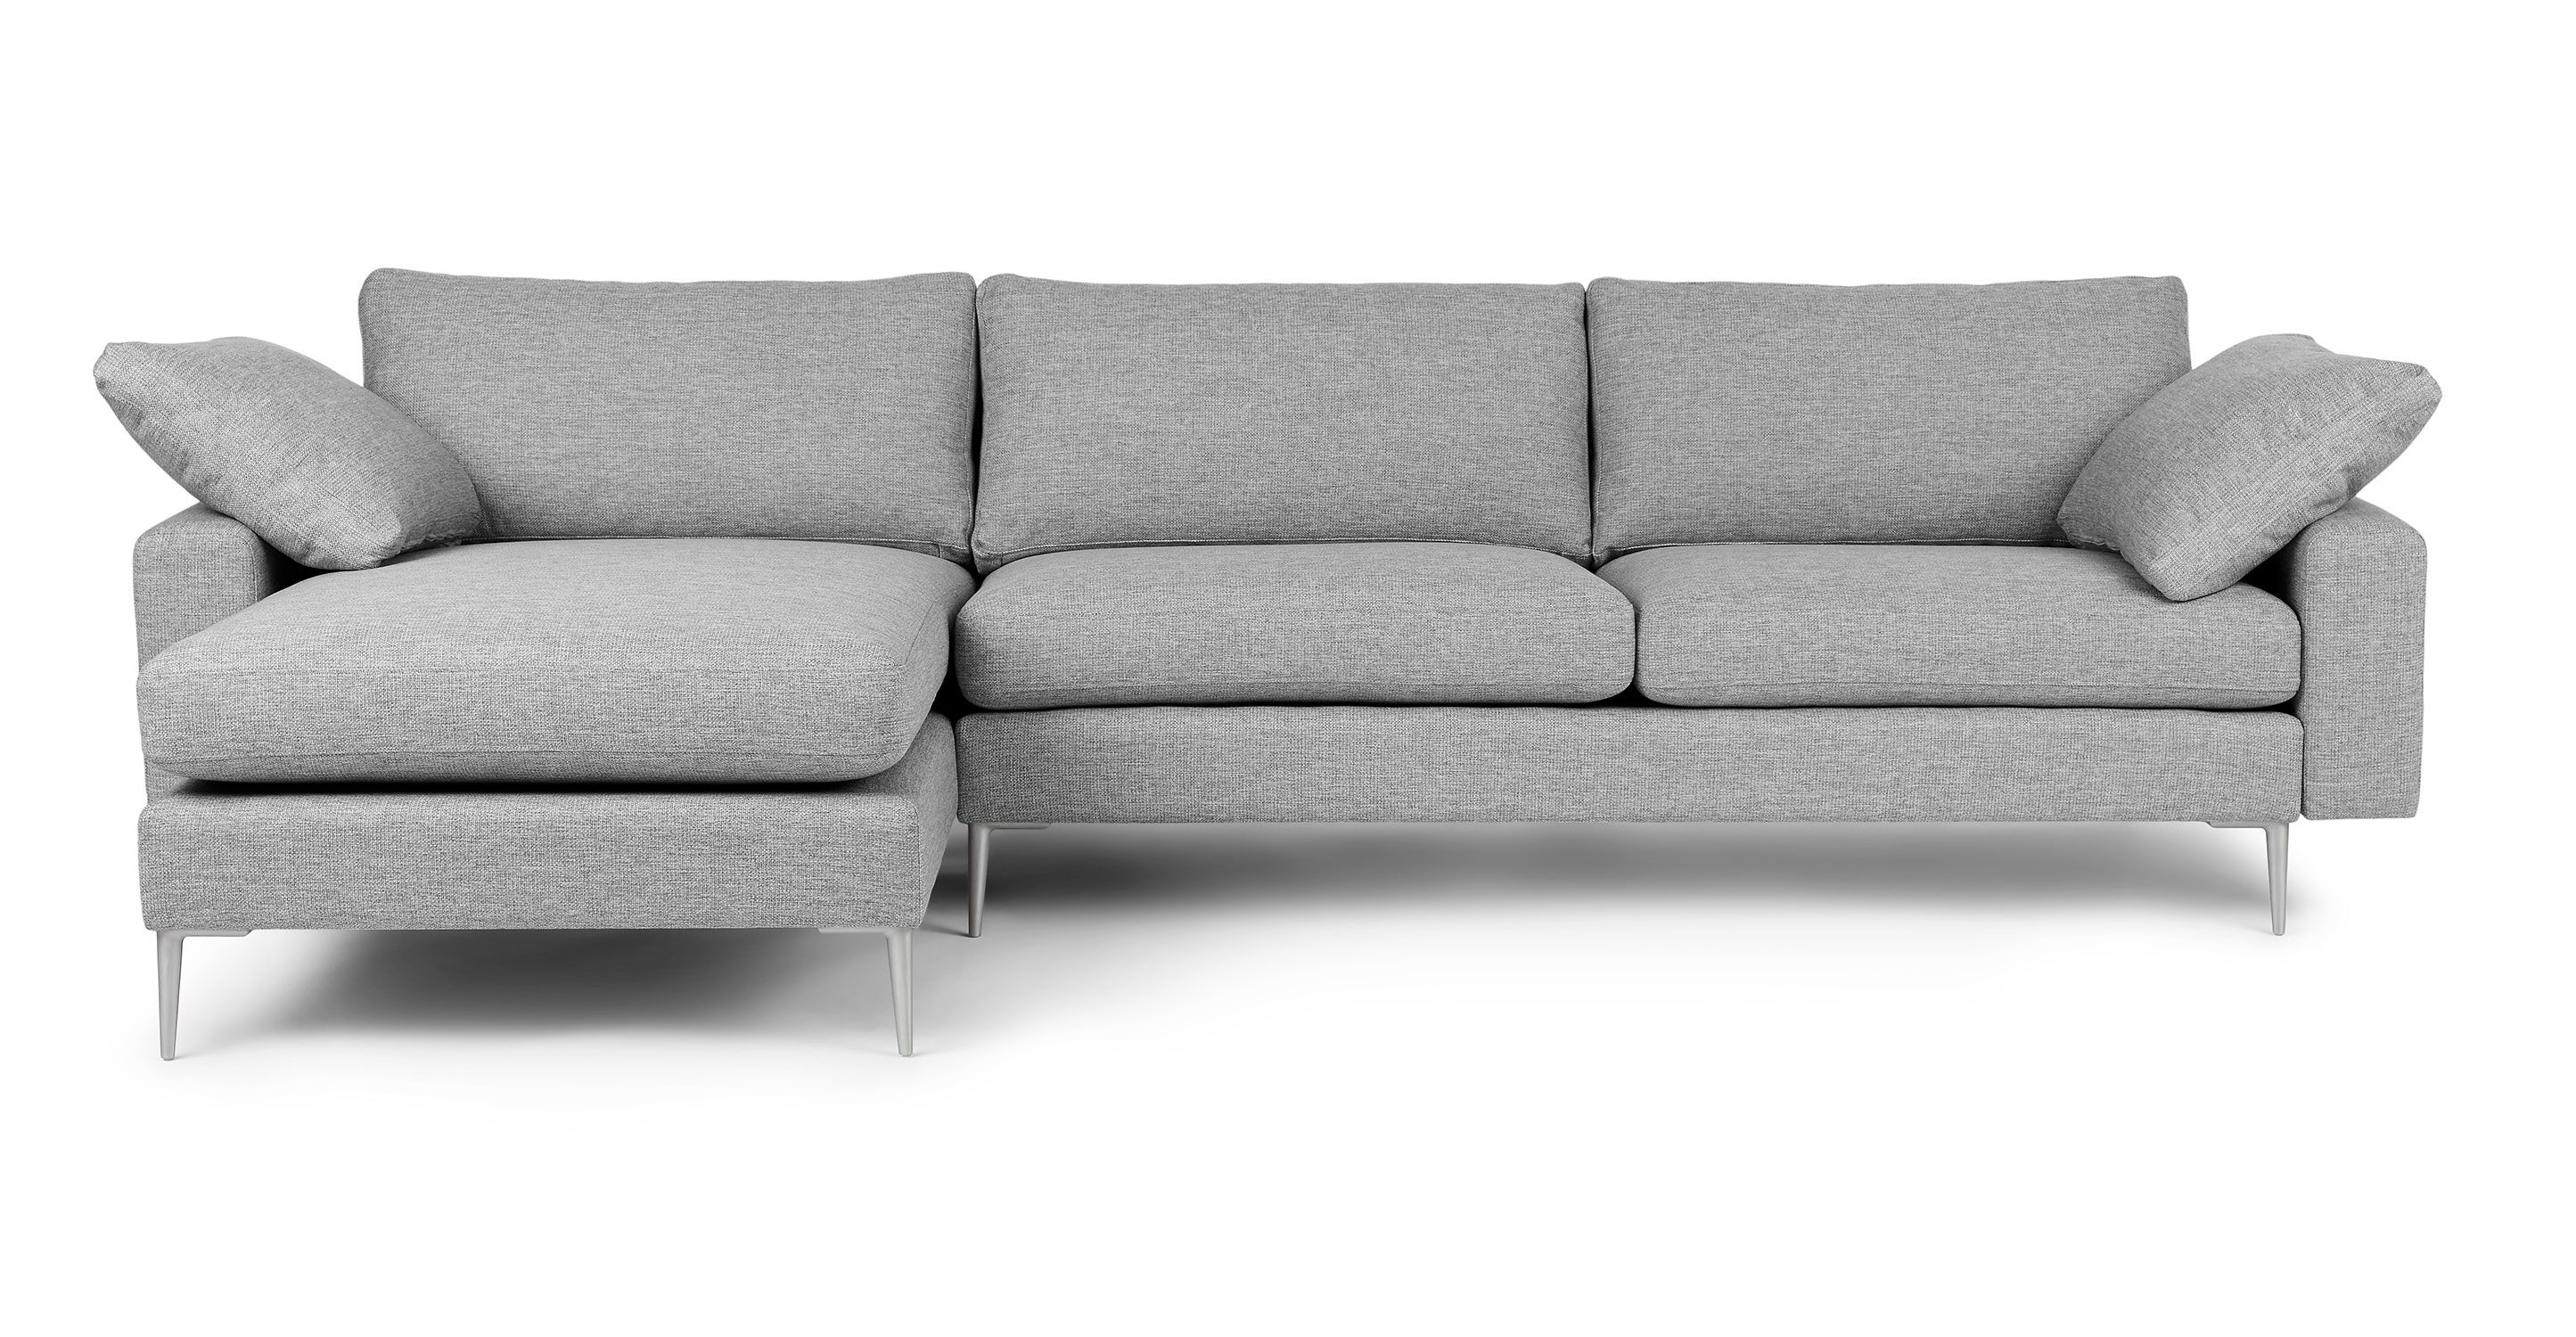 Winter Gray Reversible Fabric Sectional | Nova | Article For Reversible Sectional Sofas (Gallery 9 of 20)